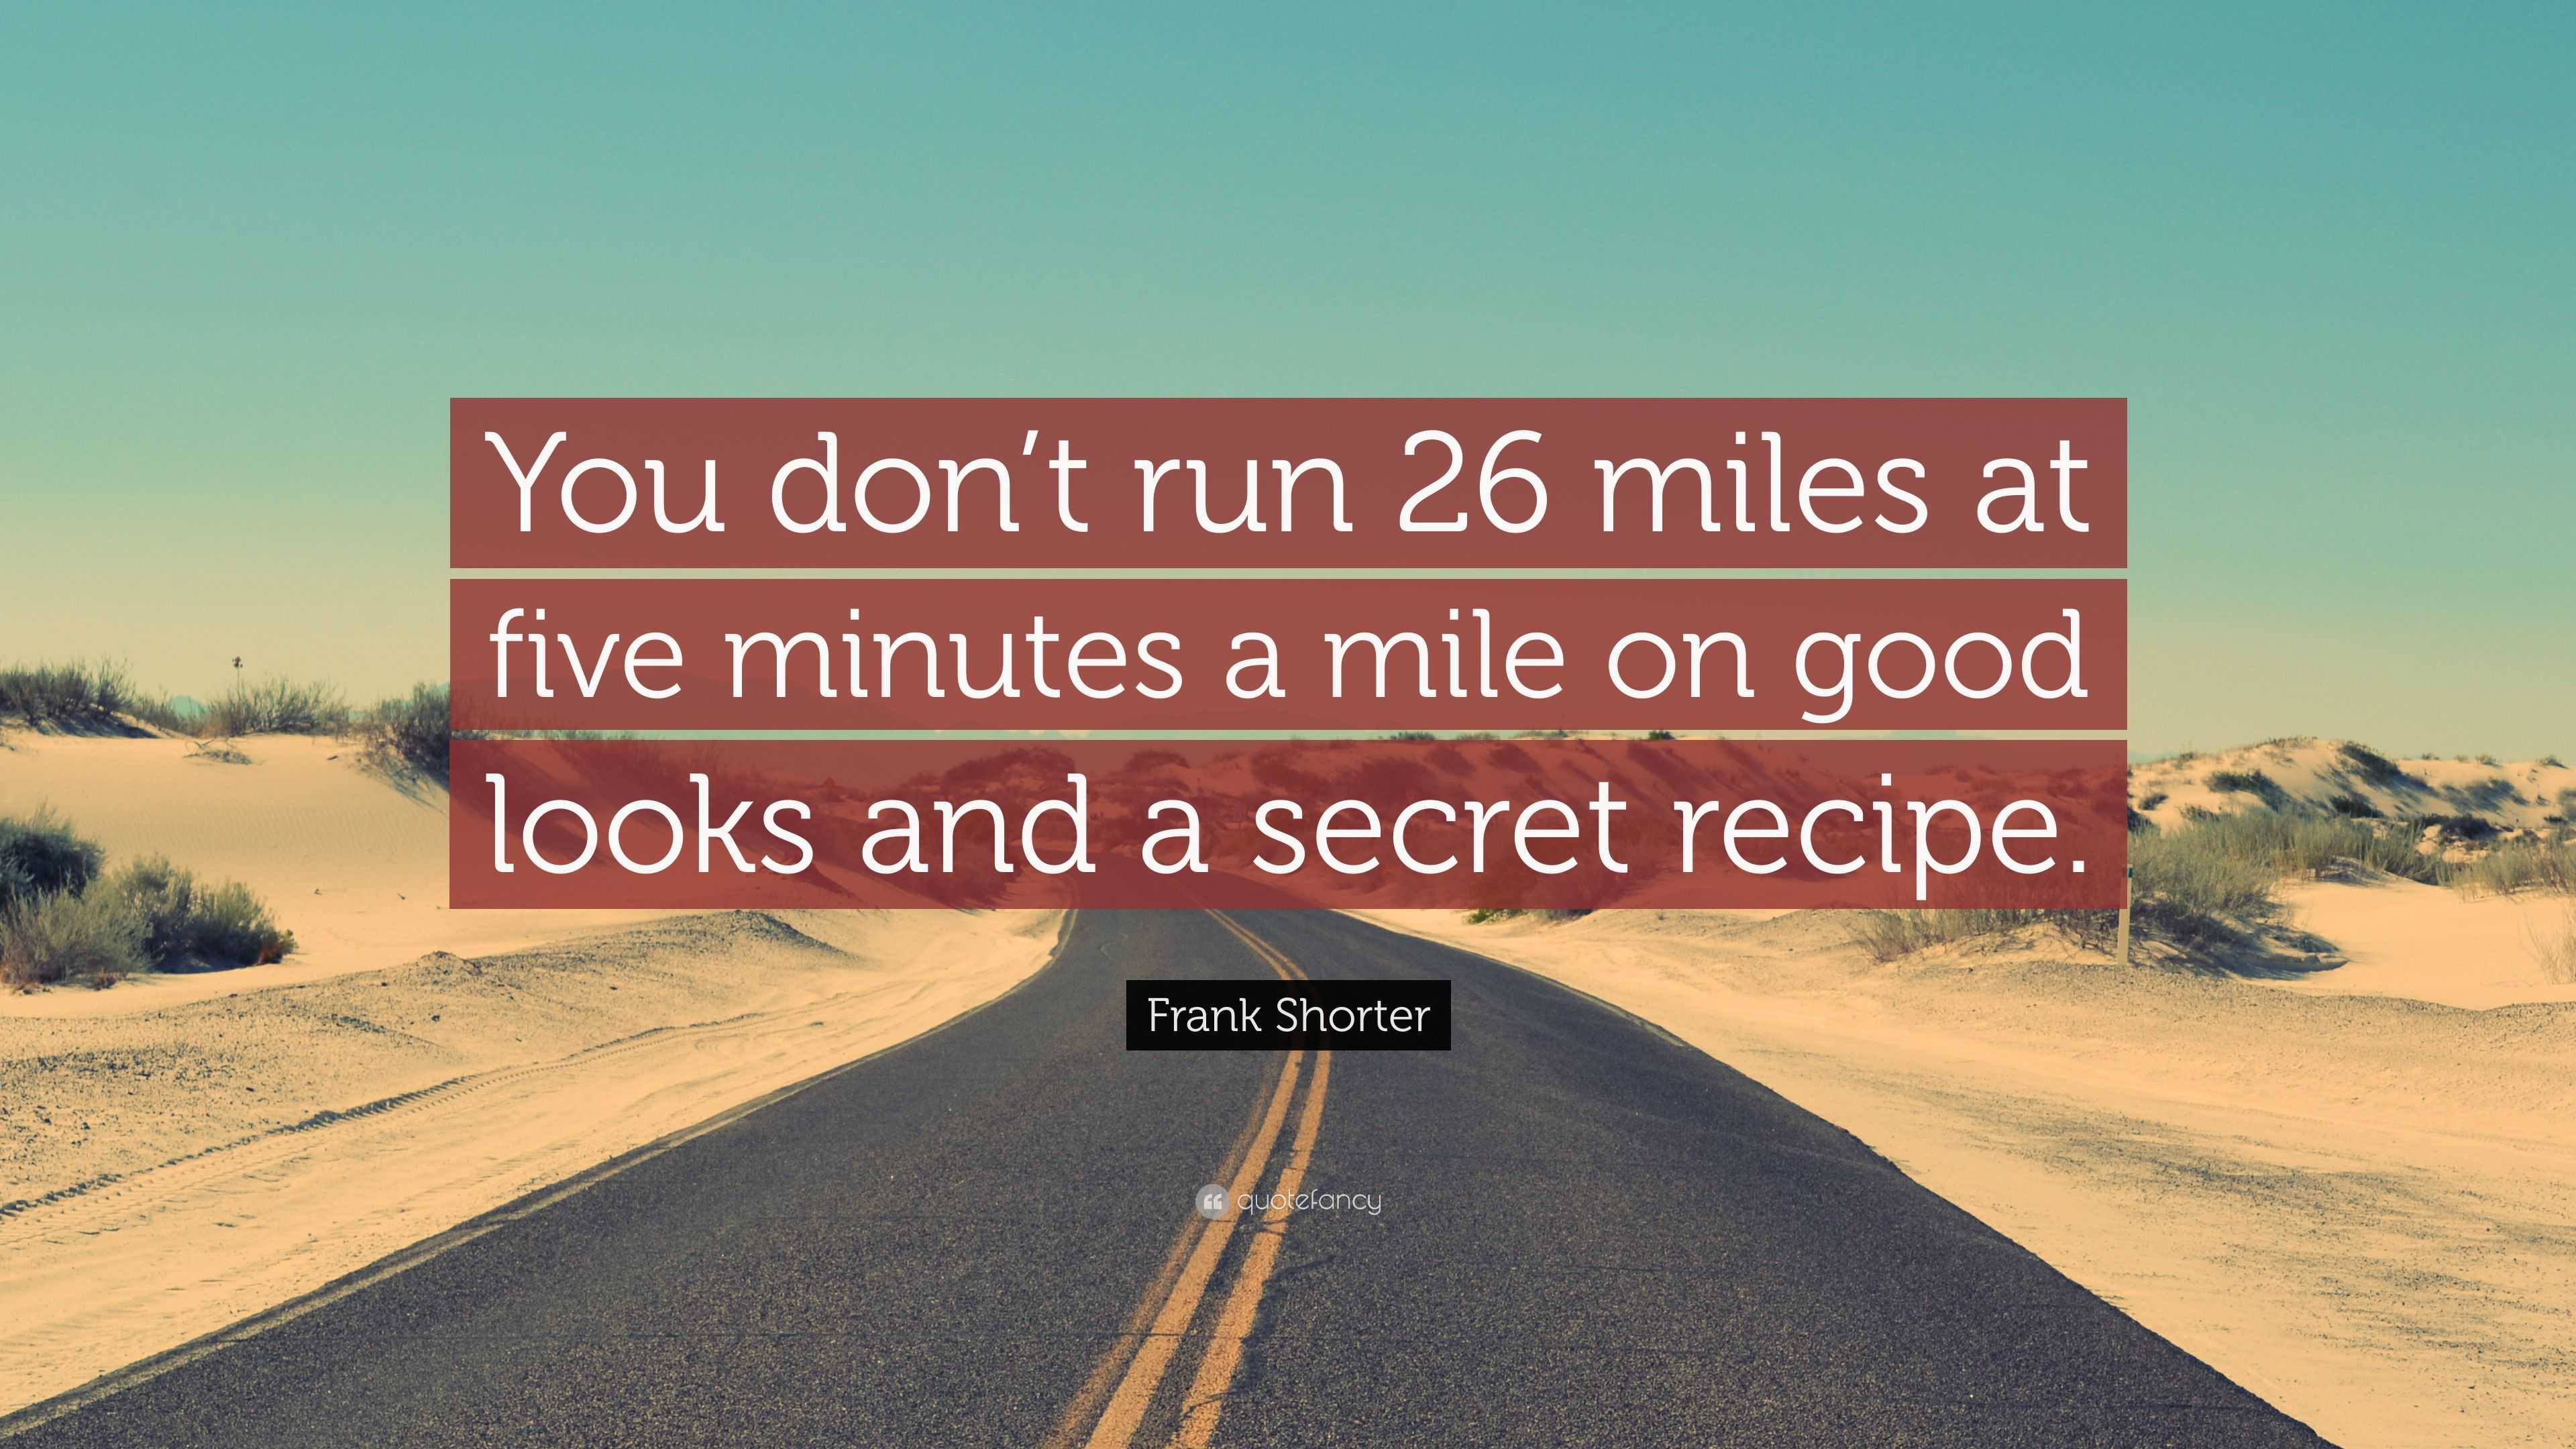 Frank Shorter Quote: "You don't run 26 miles at five minutes a mile on good looks and a secret ...